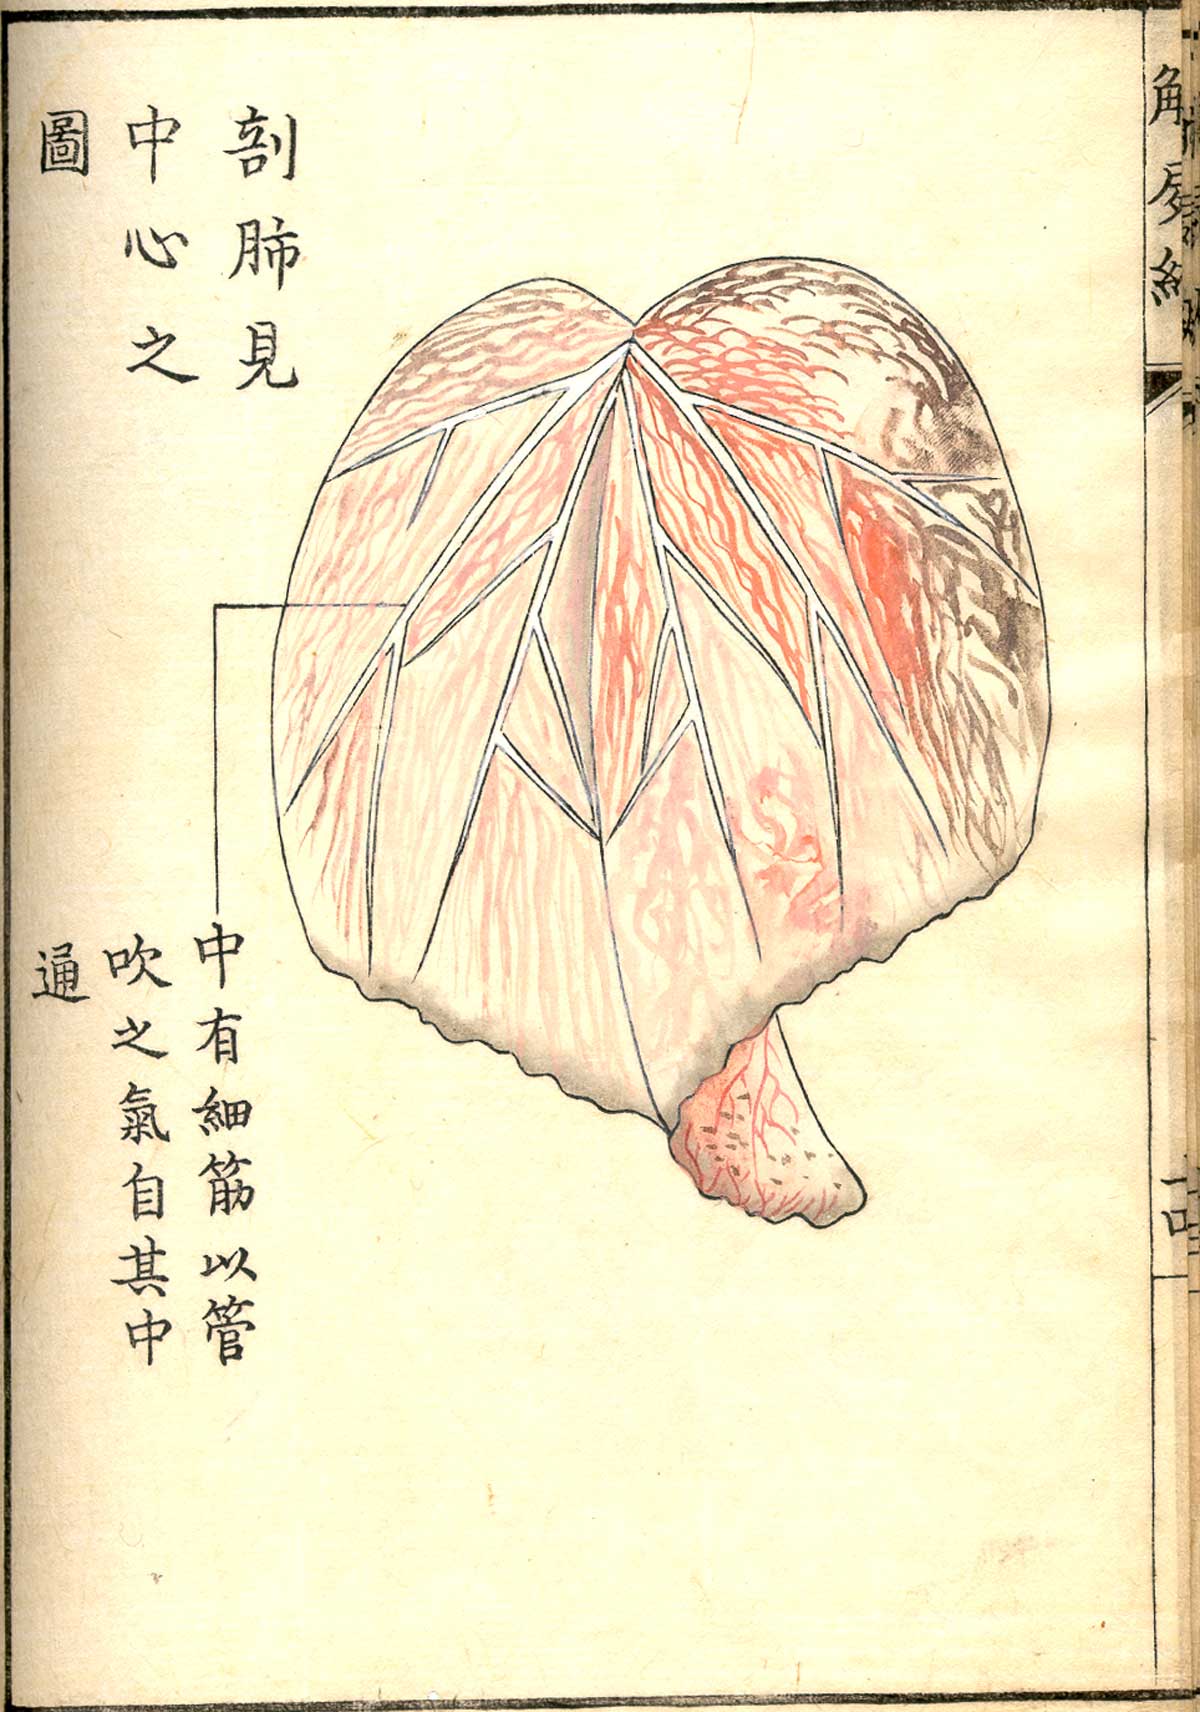 Hand colored woodcut of a lobe of the lung with Japanese text above and below describing some of the structures, from Shinnin Kawaguchi's Kaishi hen, NLM Call no.: WZ 260 K21k 1772.